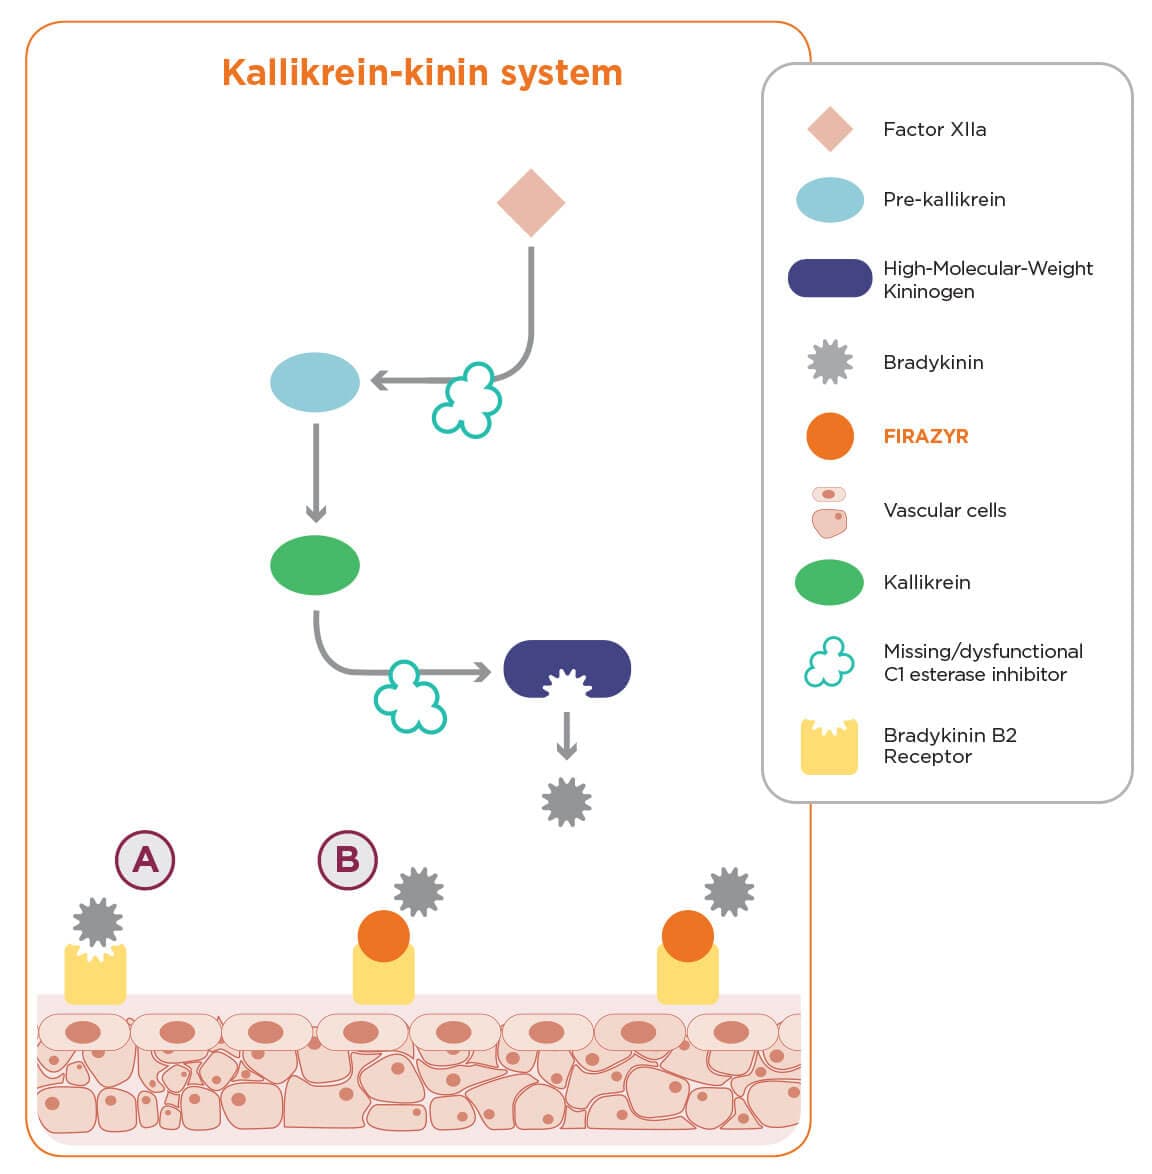 Kallikrein-kinin system showing how FIRAZYR® (icatibant injection) is a proven bradykinin B2-receptor antagonist used to treat HAE attacks.